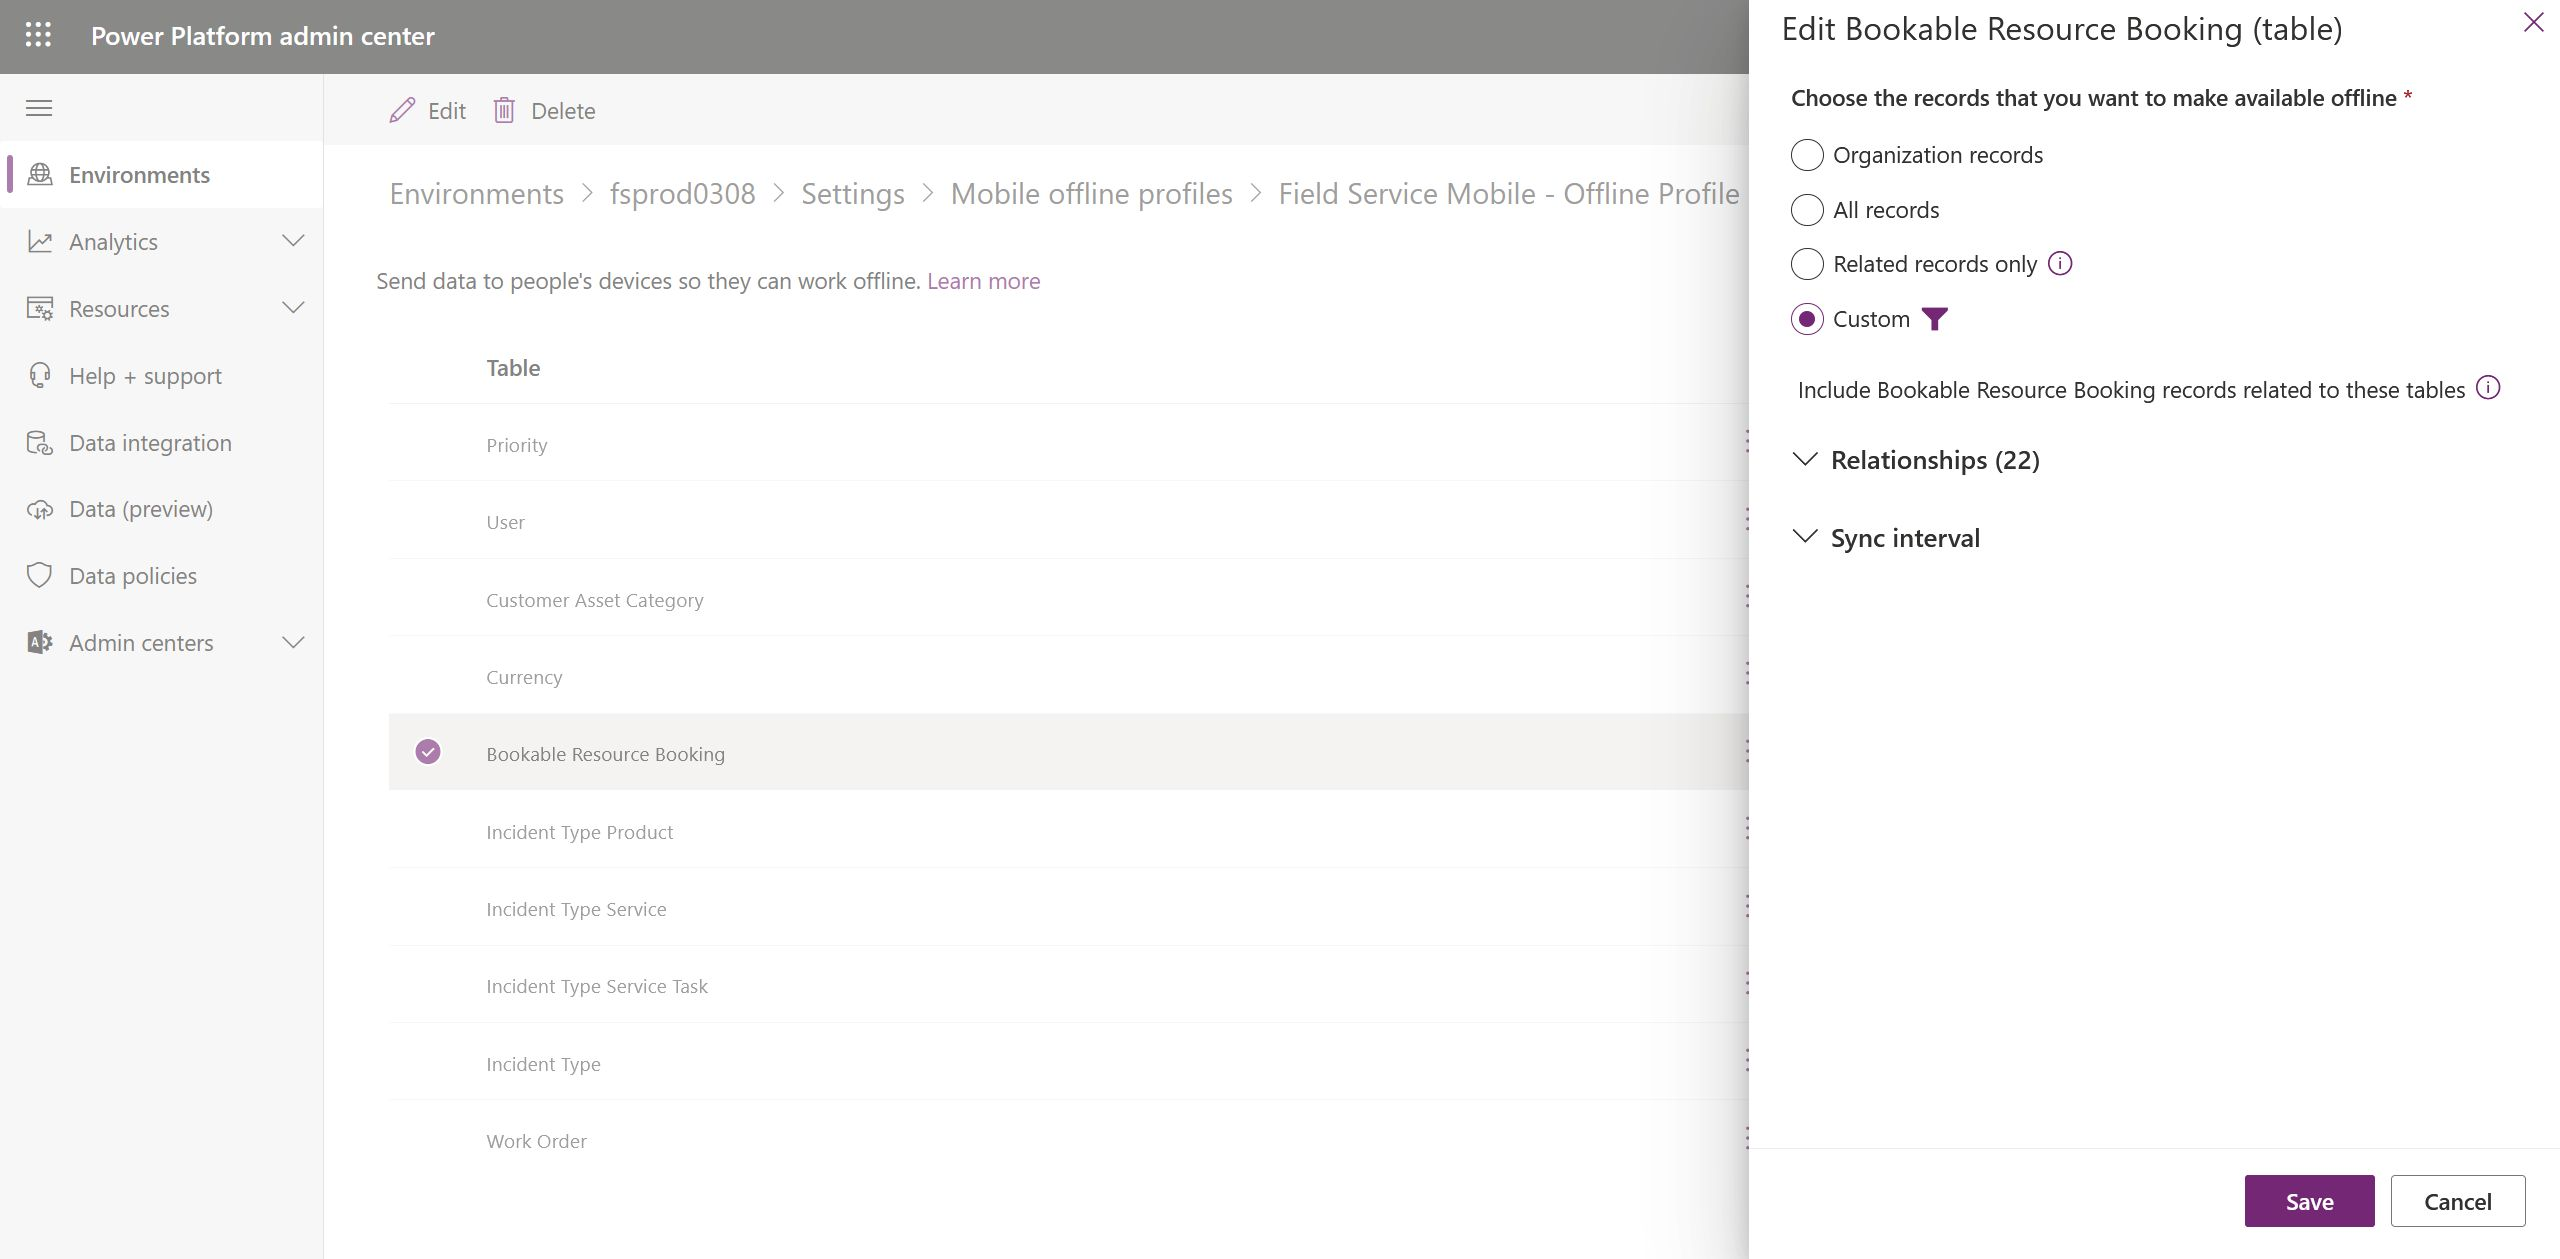 Screenshot of the Power Platform admin center, showing the edit bookable resource booking entity options.